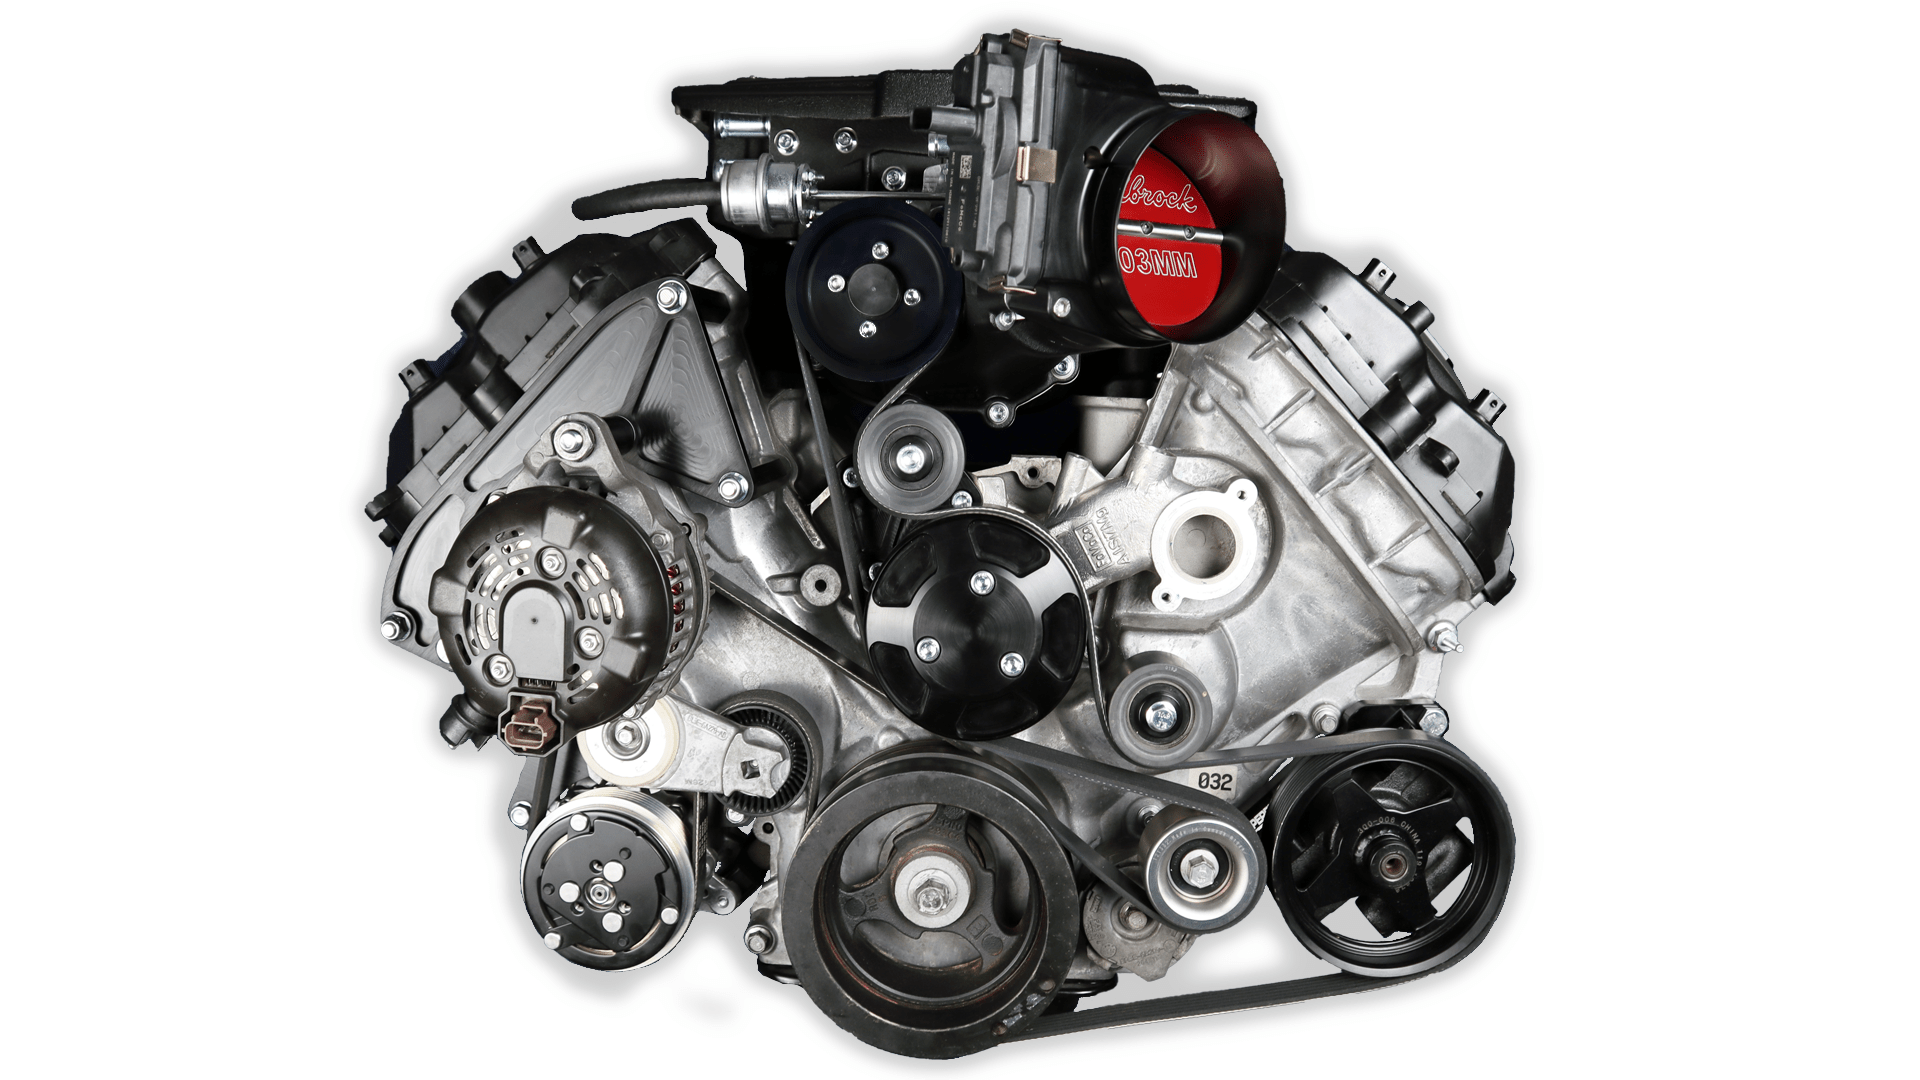 Edelbrock 2650 Supercharged Speed Drive for 5.0L Coyote